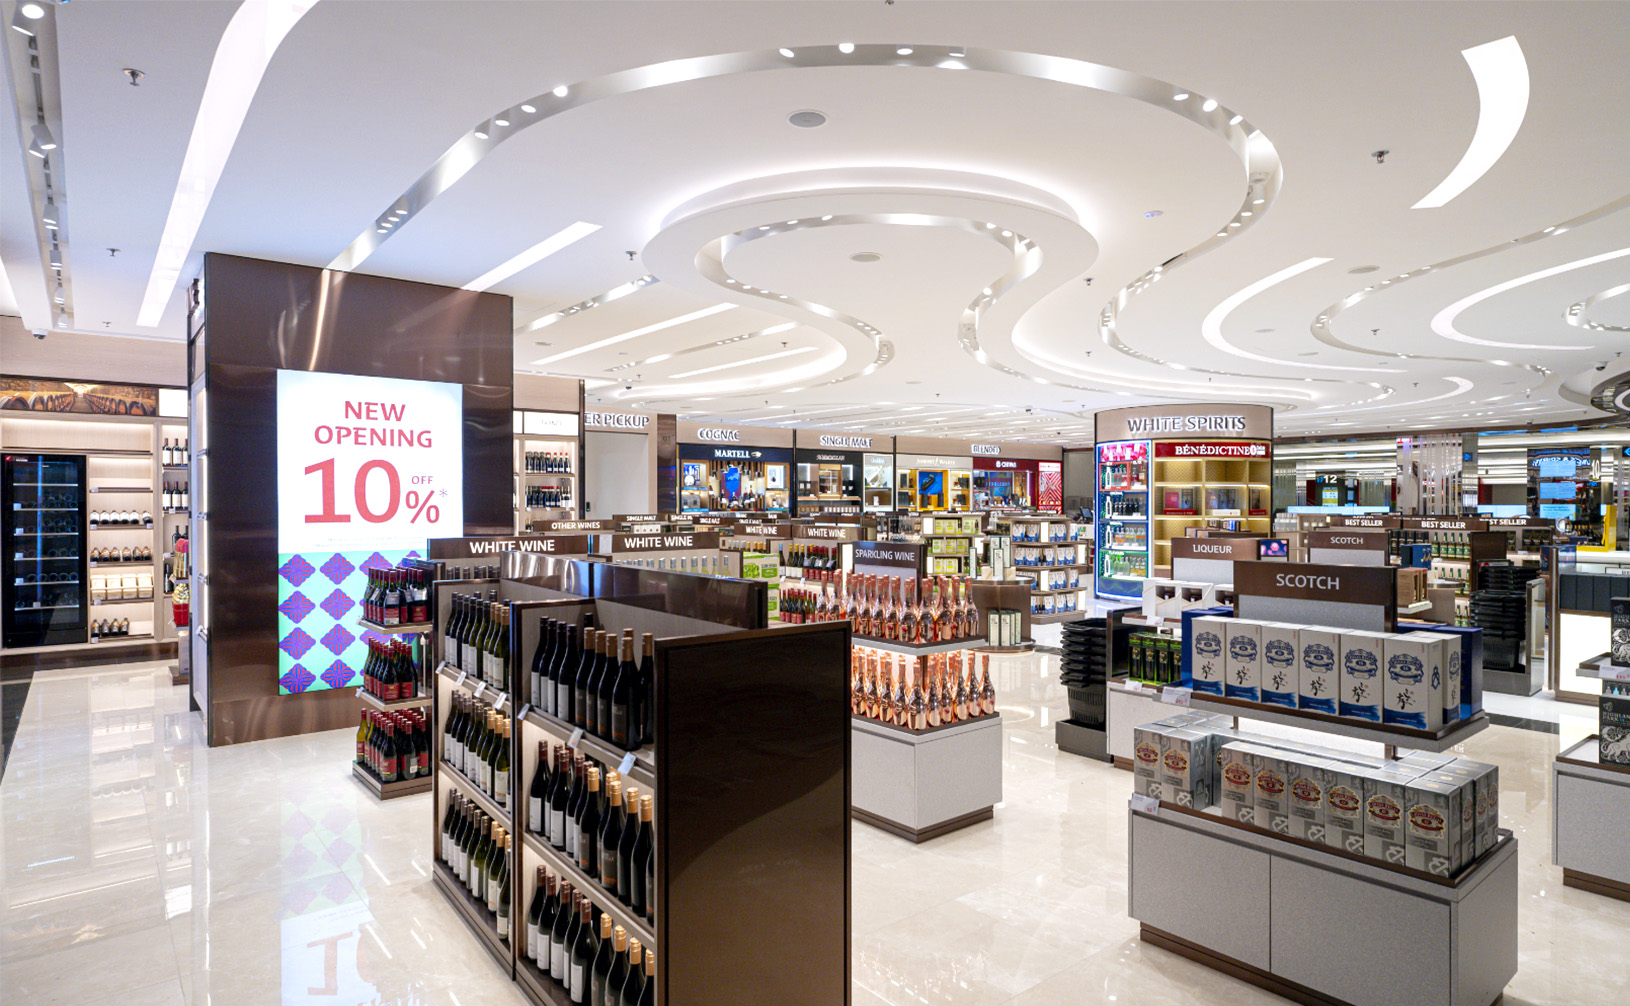 Duty free shop that sells cosmetics of the famous brands at Don